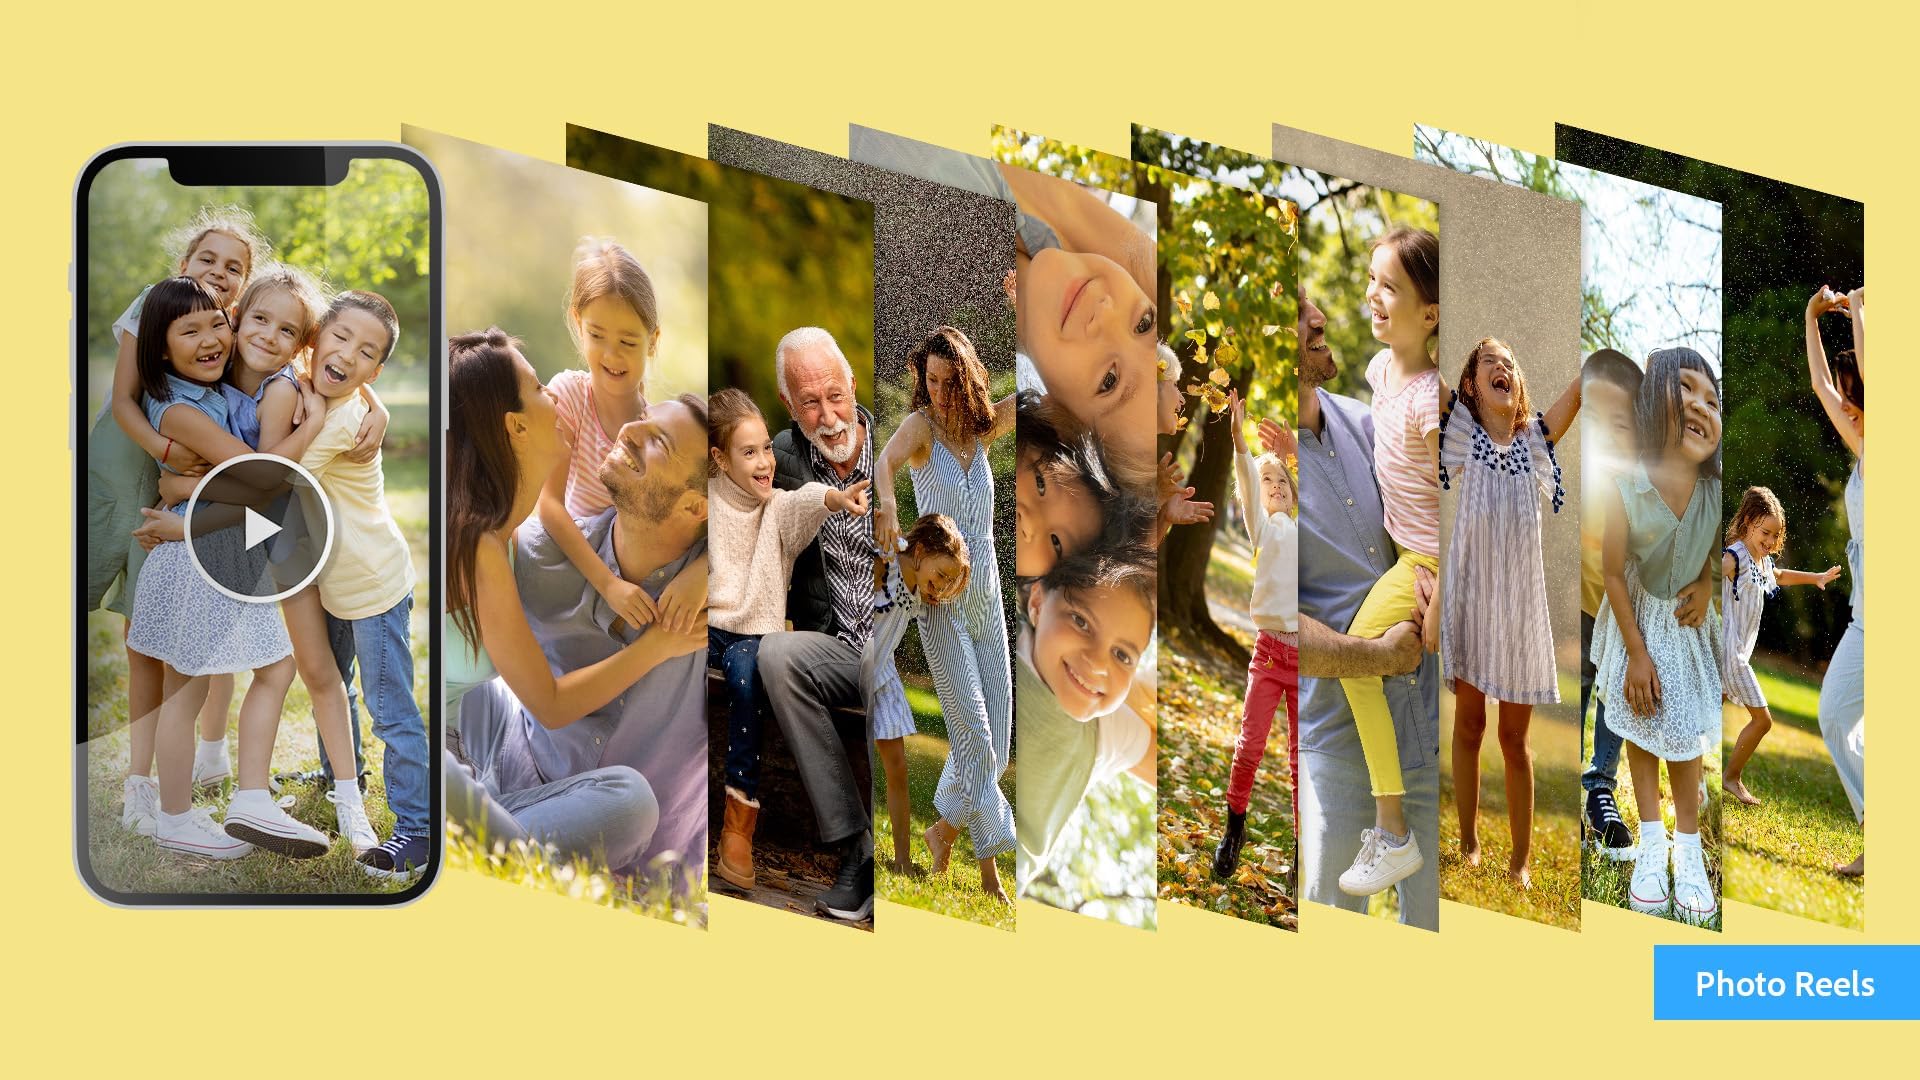 Adobe | Photoshop Elements 2024 & Premiere Elements 2024 Student & Teacher Edition | PC Code | Software Download | Photo Editing | Video Editing [PC Online code]